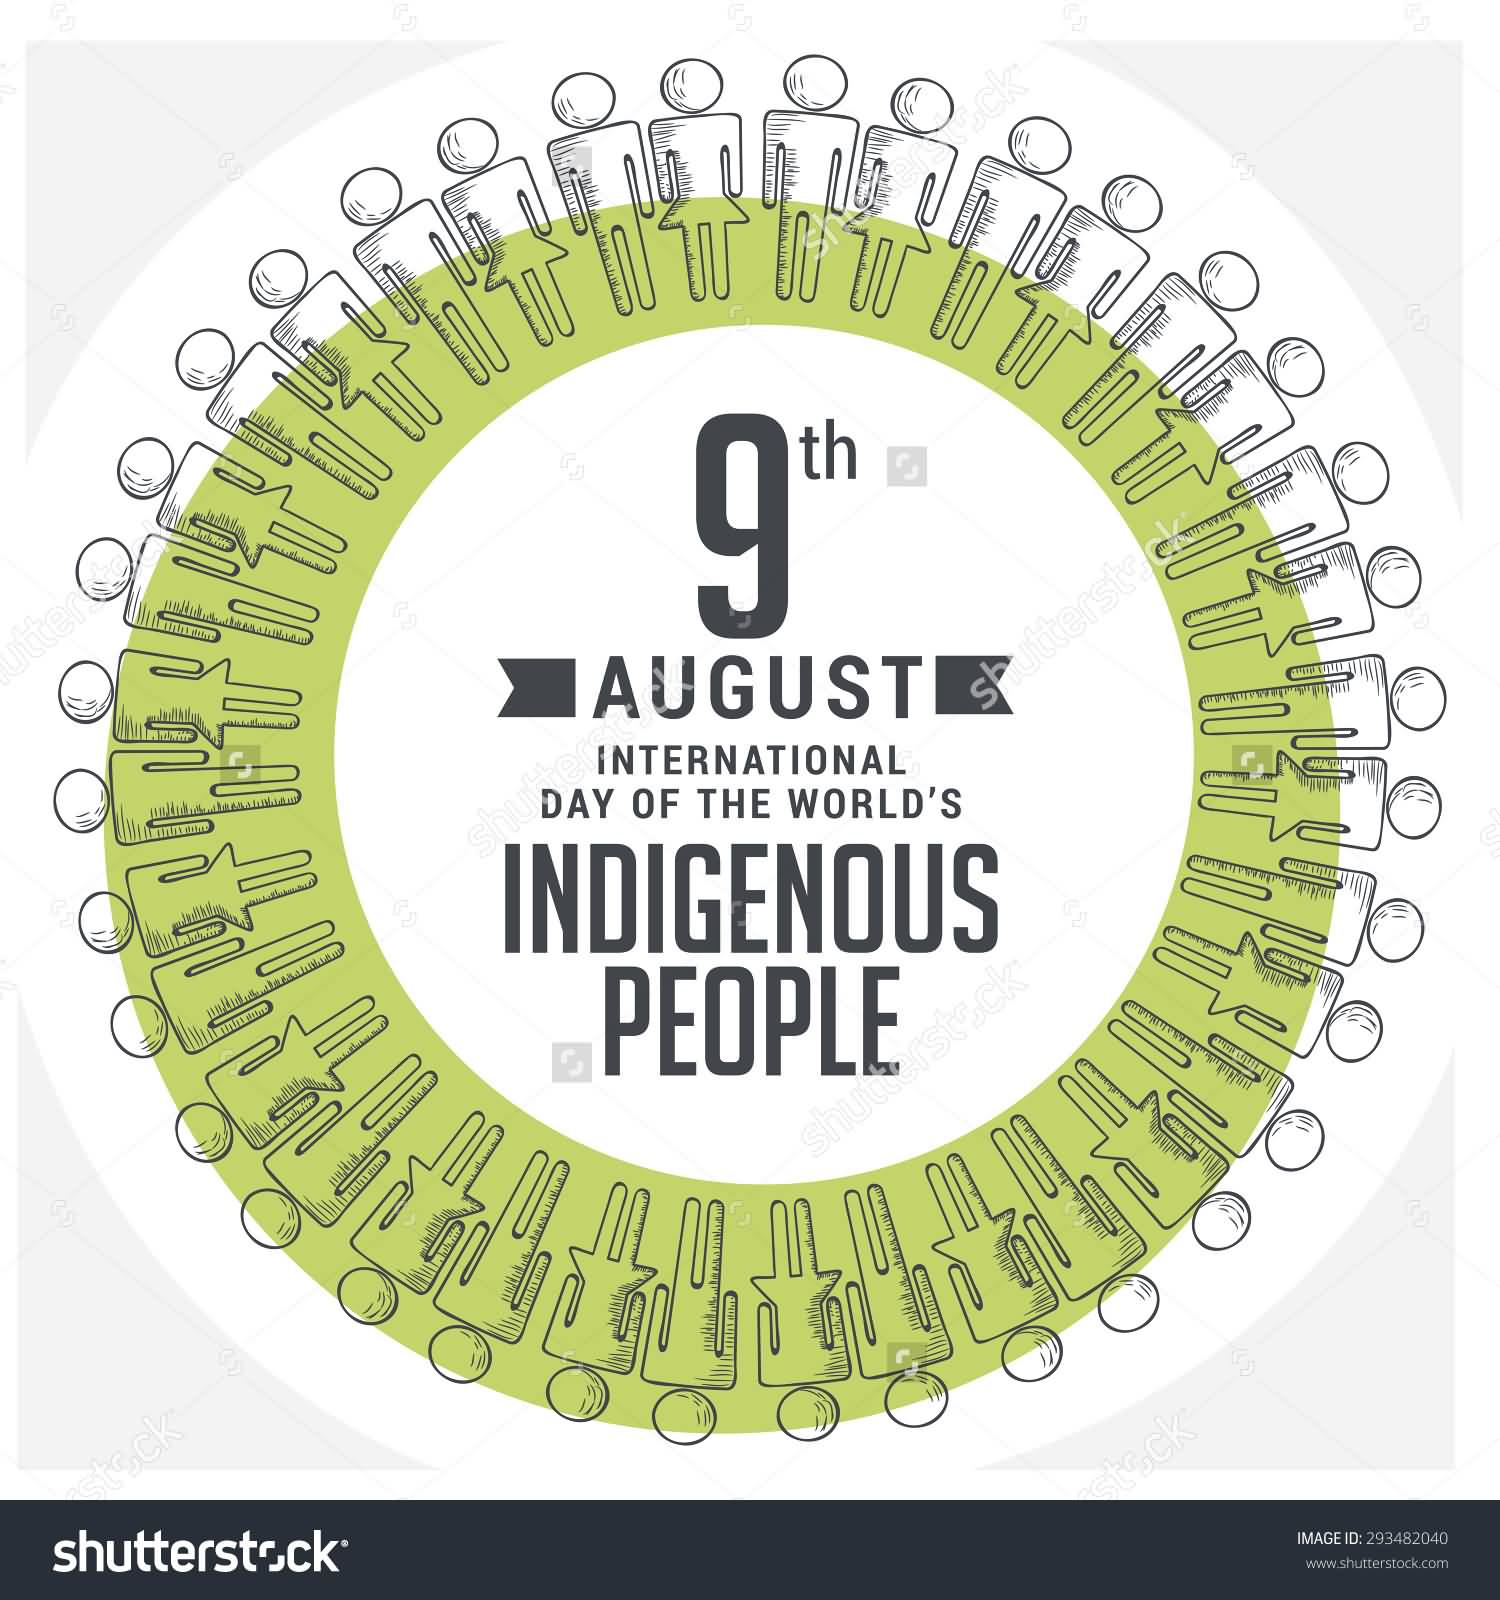 9th August International Day of the World's Indigenous Peoples Illustration